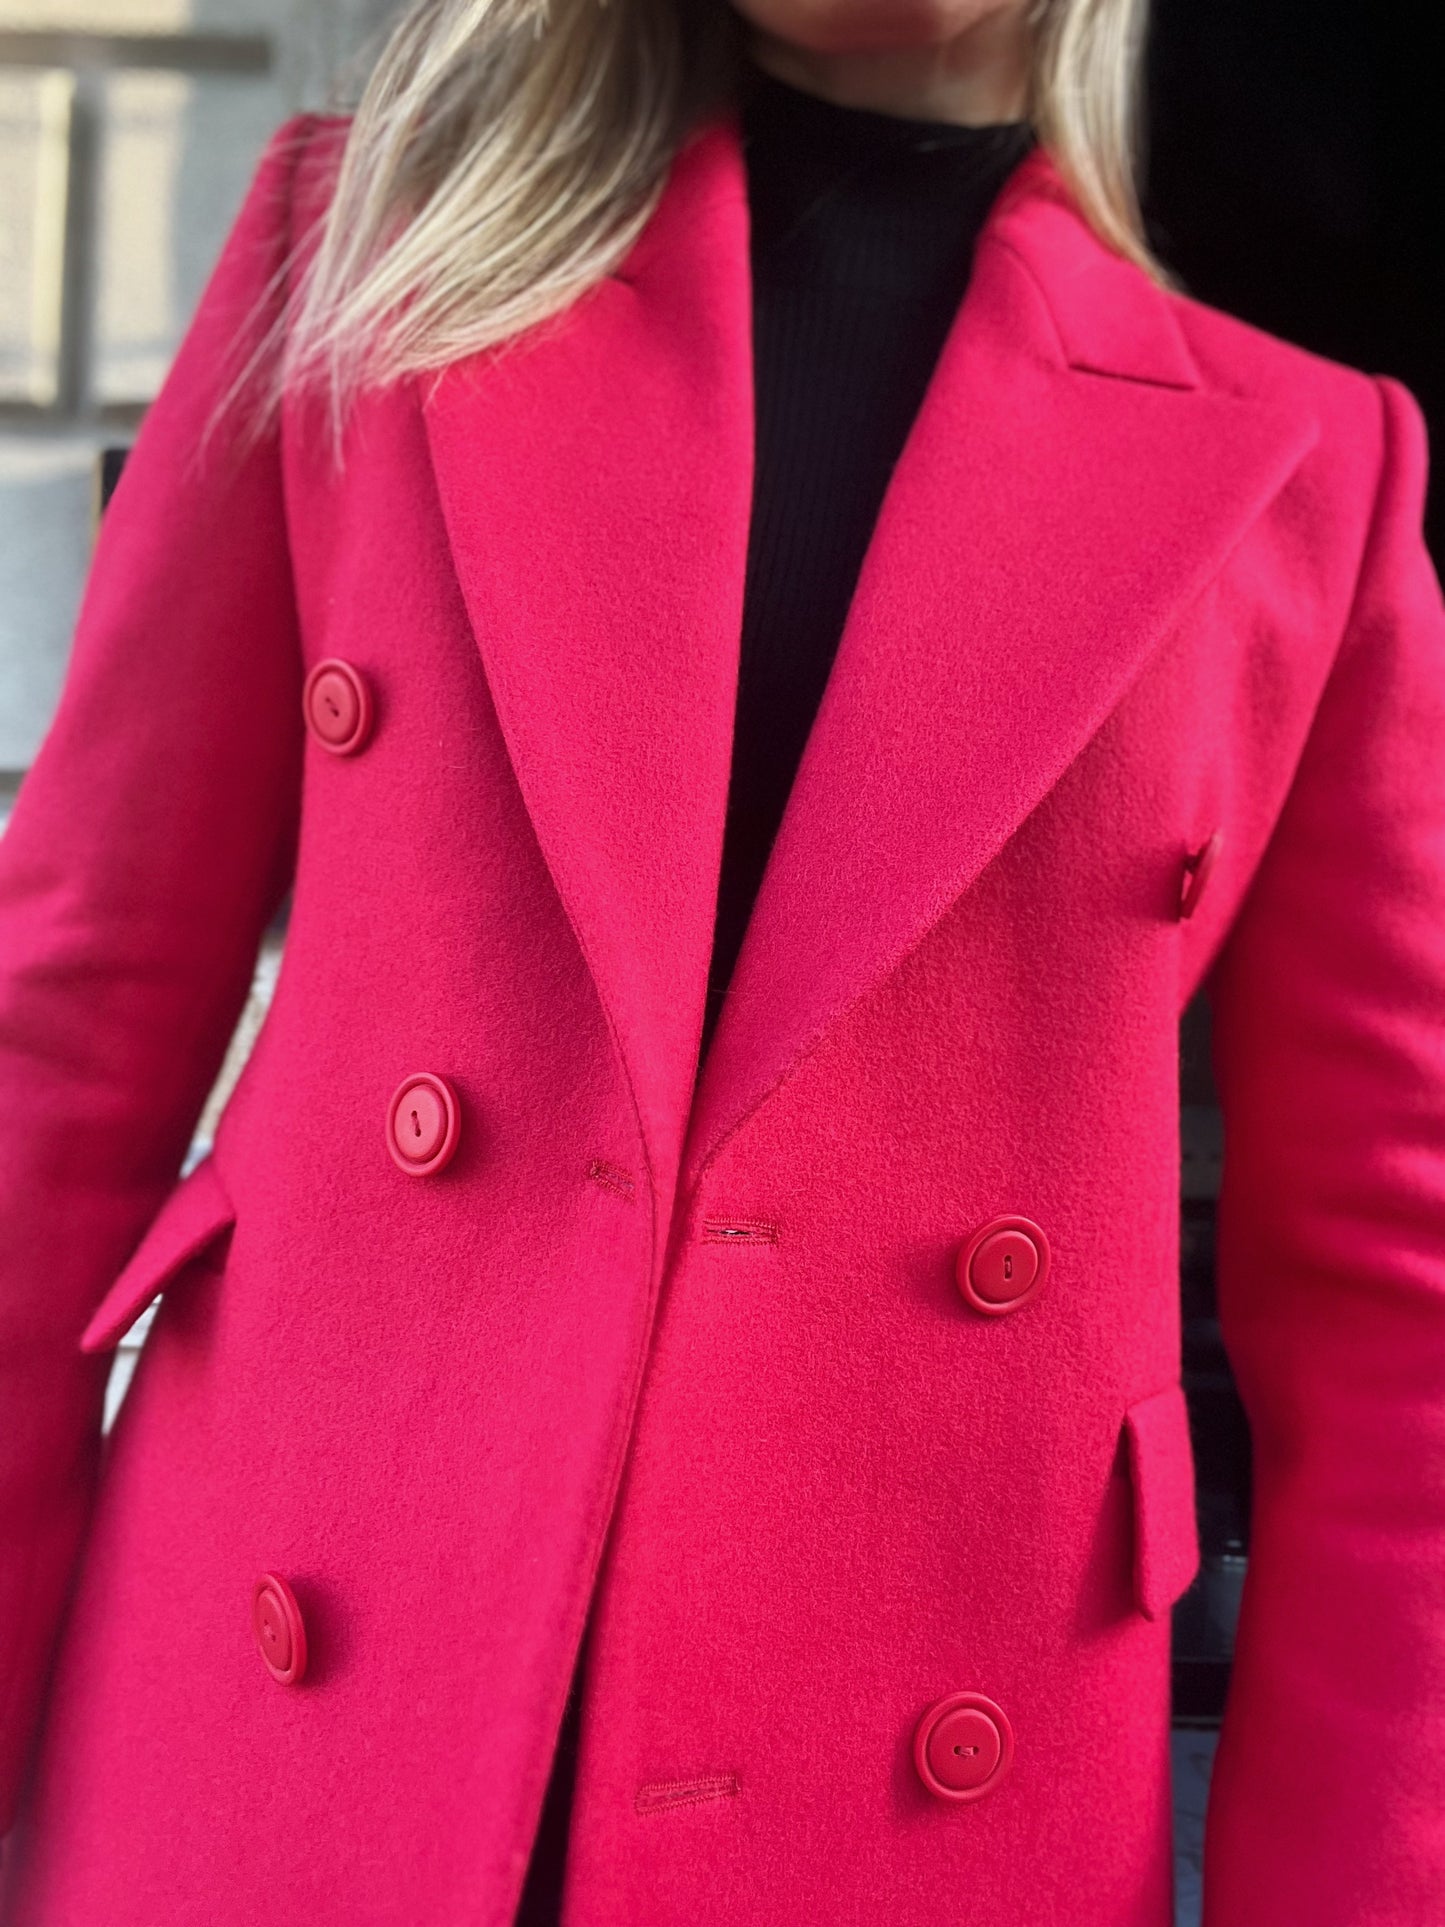 Straight coat jacket with accent shoulder